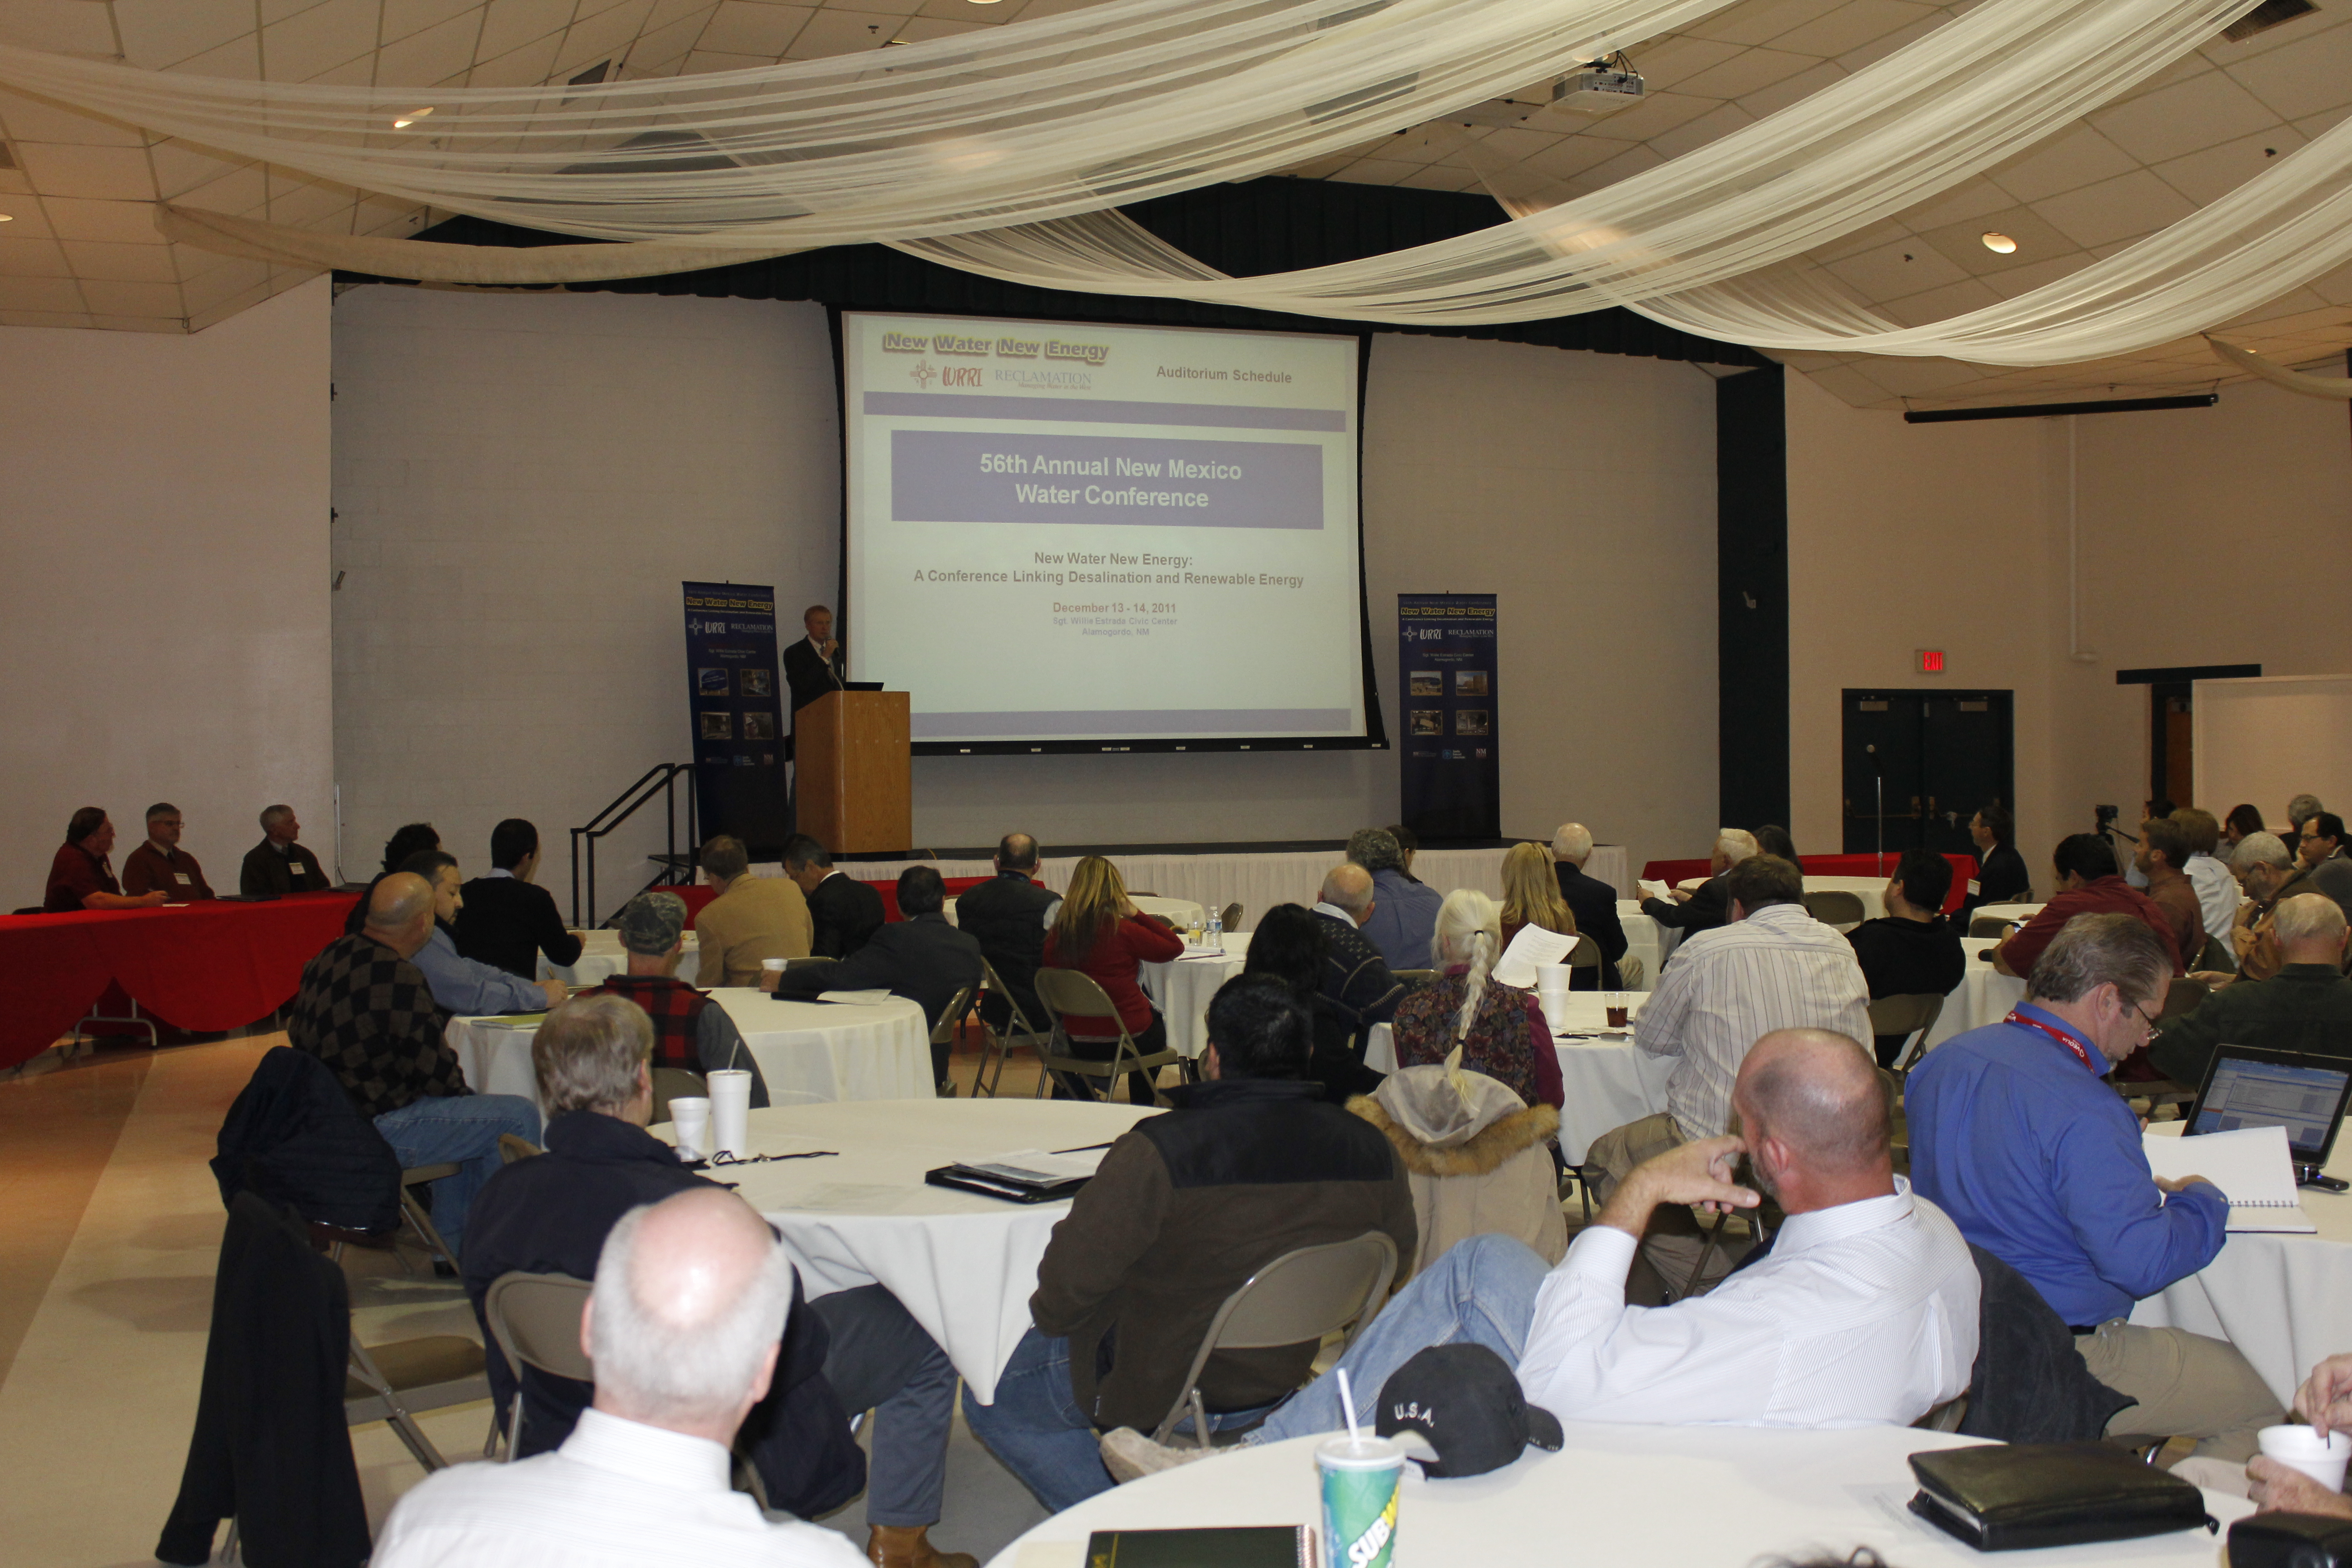 Attendees at the 56th Annual NM Water Conference